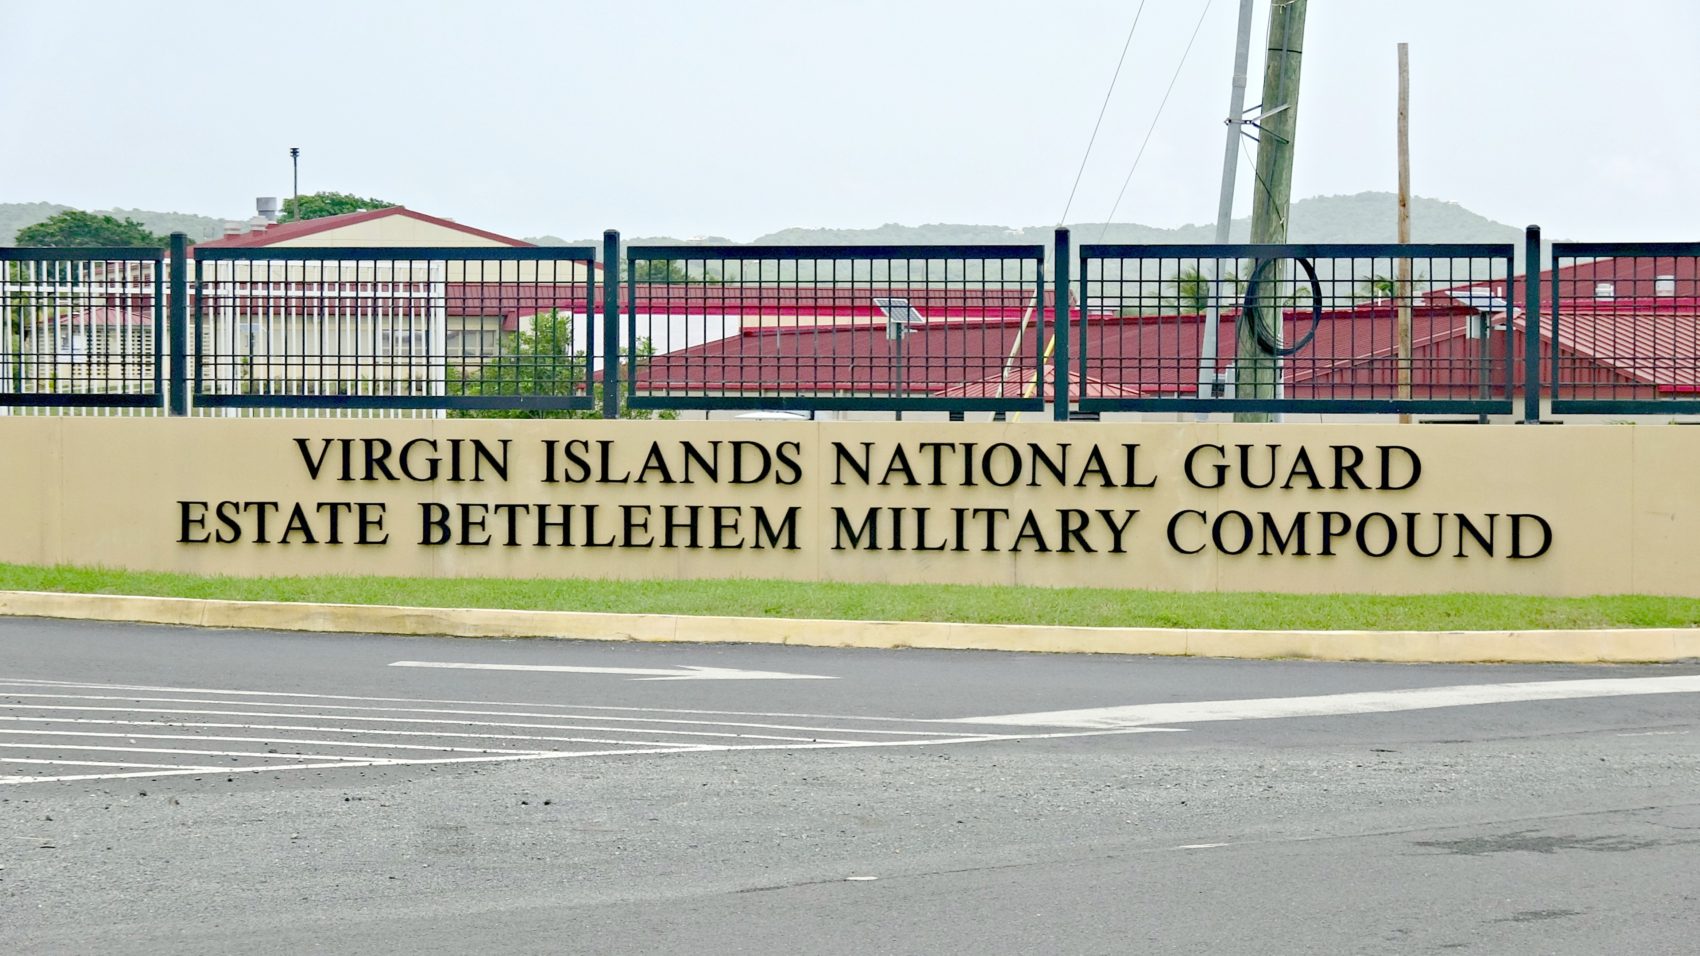 Six Virgin Islands National Guard (VING) Soldiers Go AWOL During Hurricane Irma ... Government House Won't Release Names